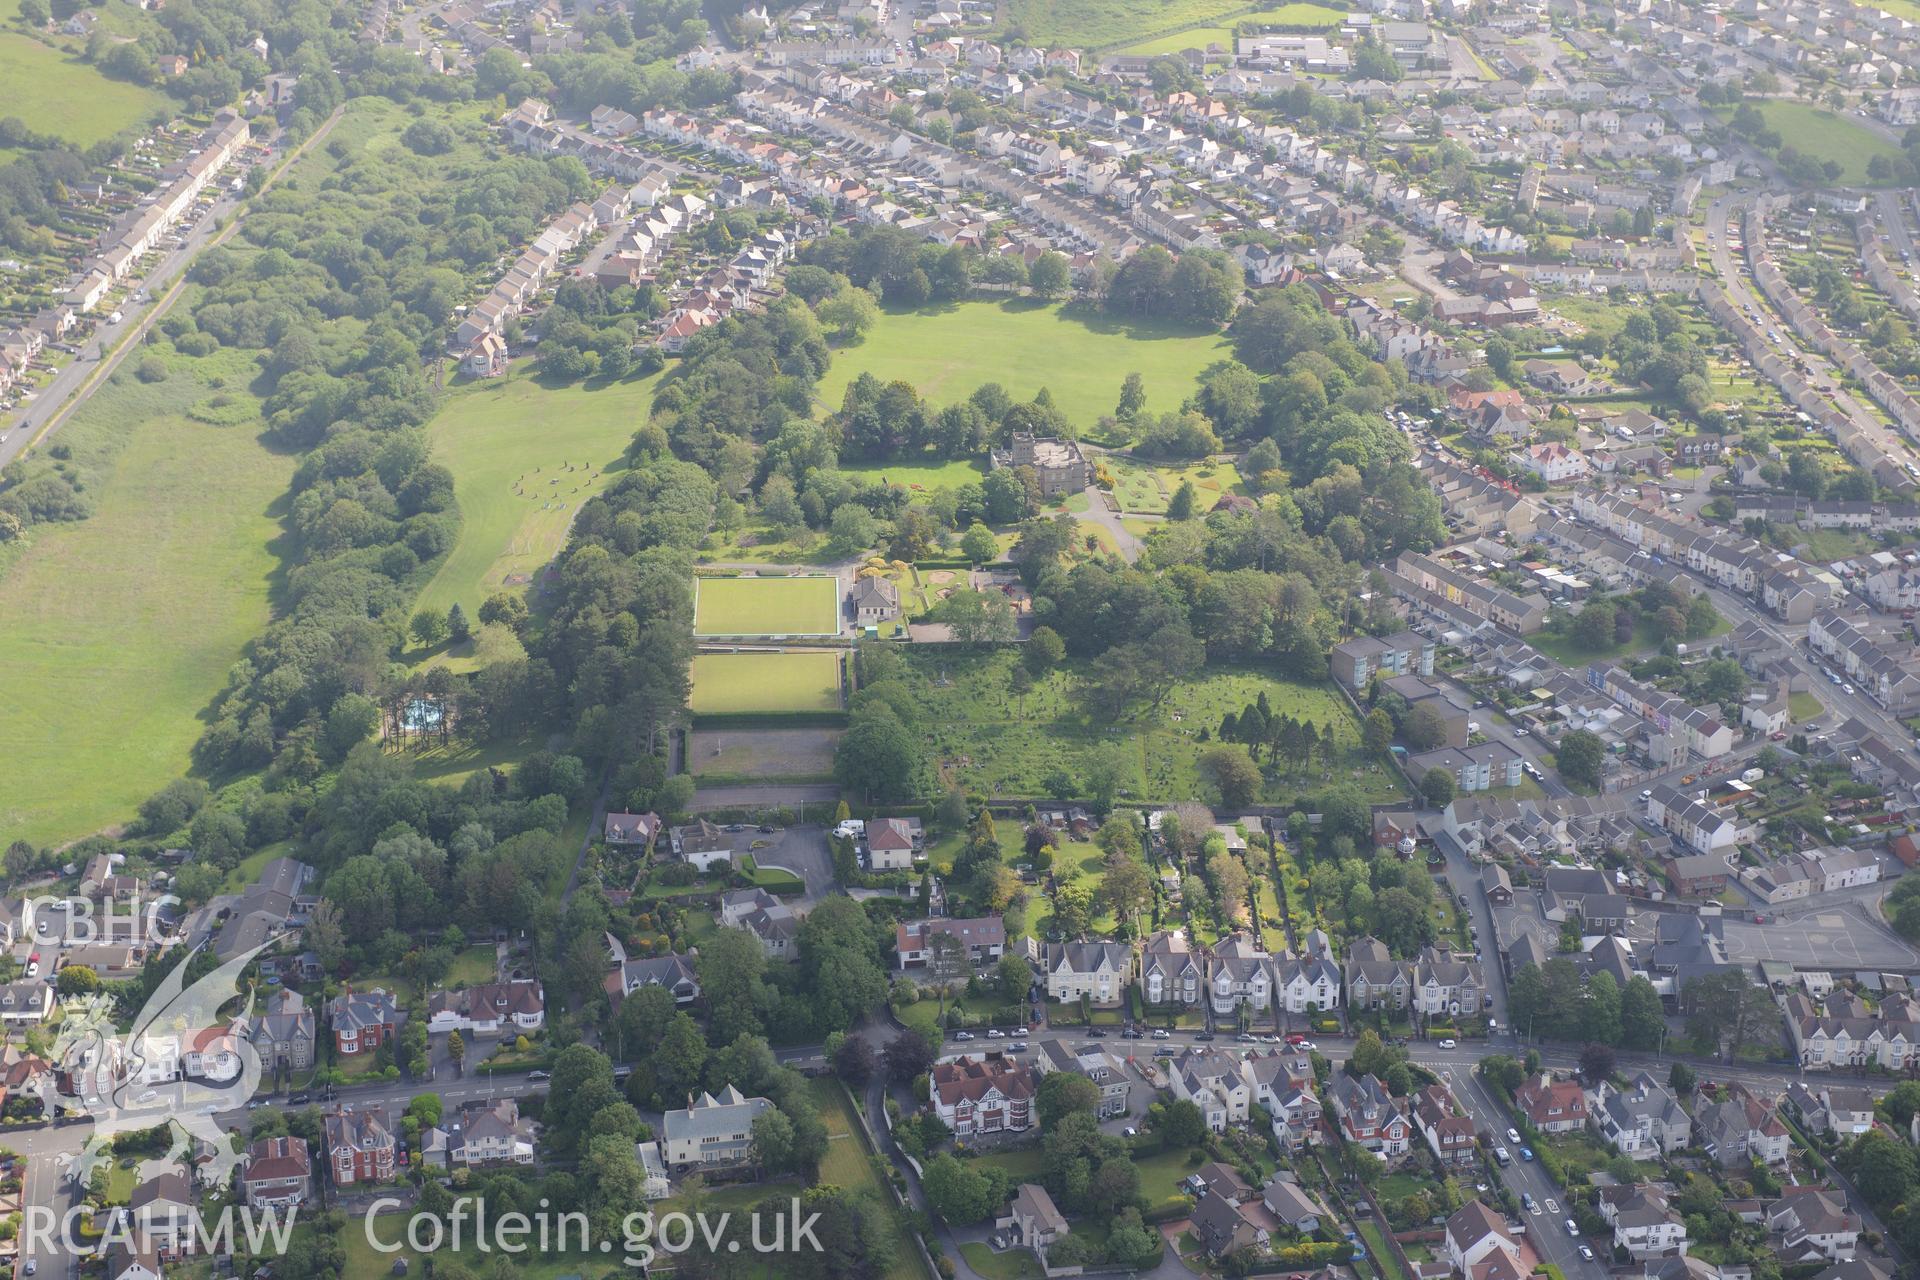 Bryncaerau Castle (now Parc Howard Museum); Parc Howard Gardens and the grounds and gardens of Bryncaerau, on the north western outskirts of Llanelli. Oblique aerial photograph taken during the Royal Commission's programme of archaeological aerial reconnaissance by Toby Driver on 19th June 2018